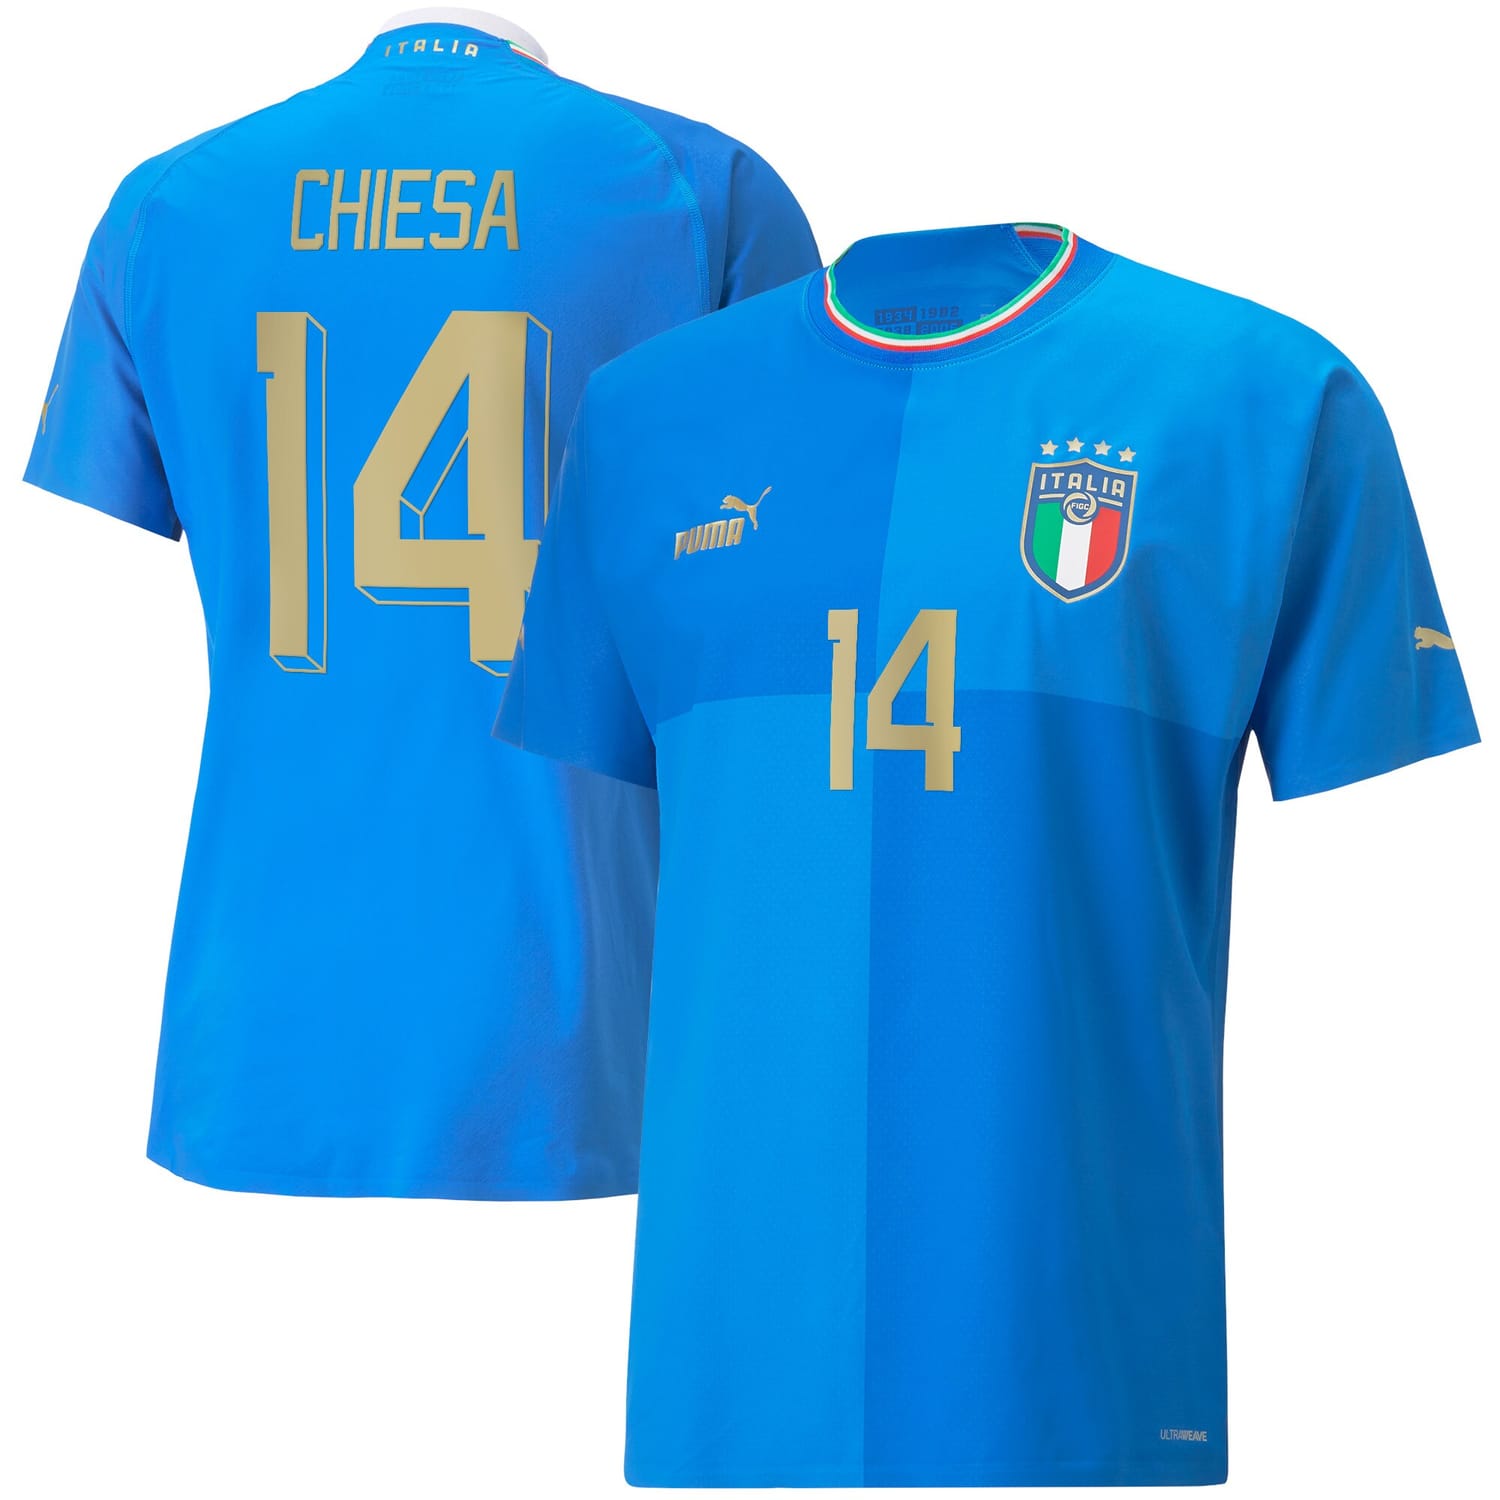 Italy National Team Home Authentic Jersey Shirt player Federico Chiesa 14 printing for Men